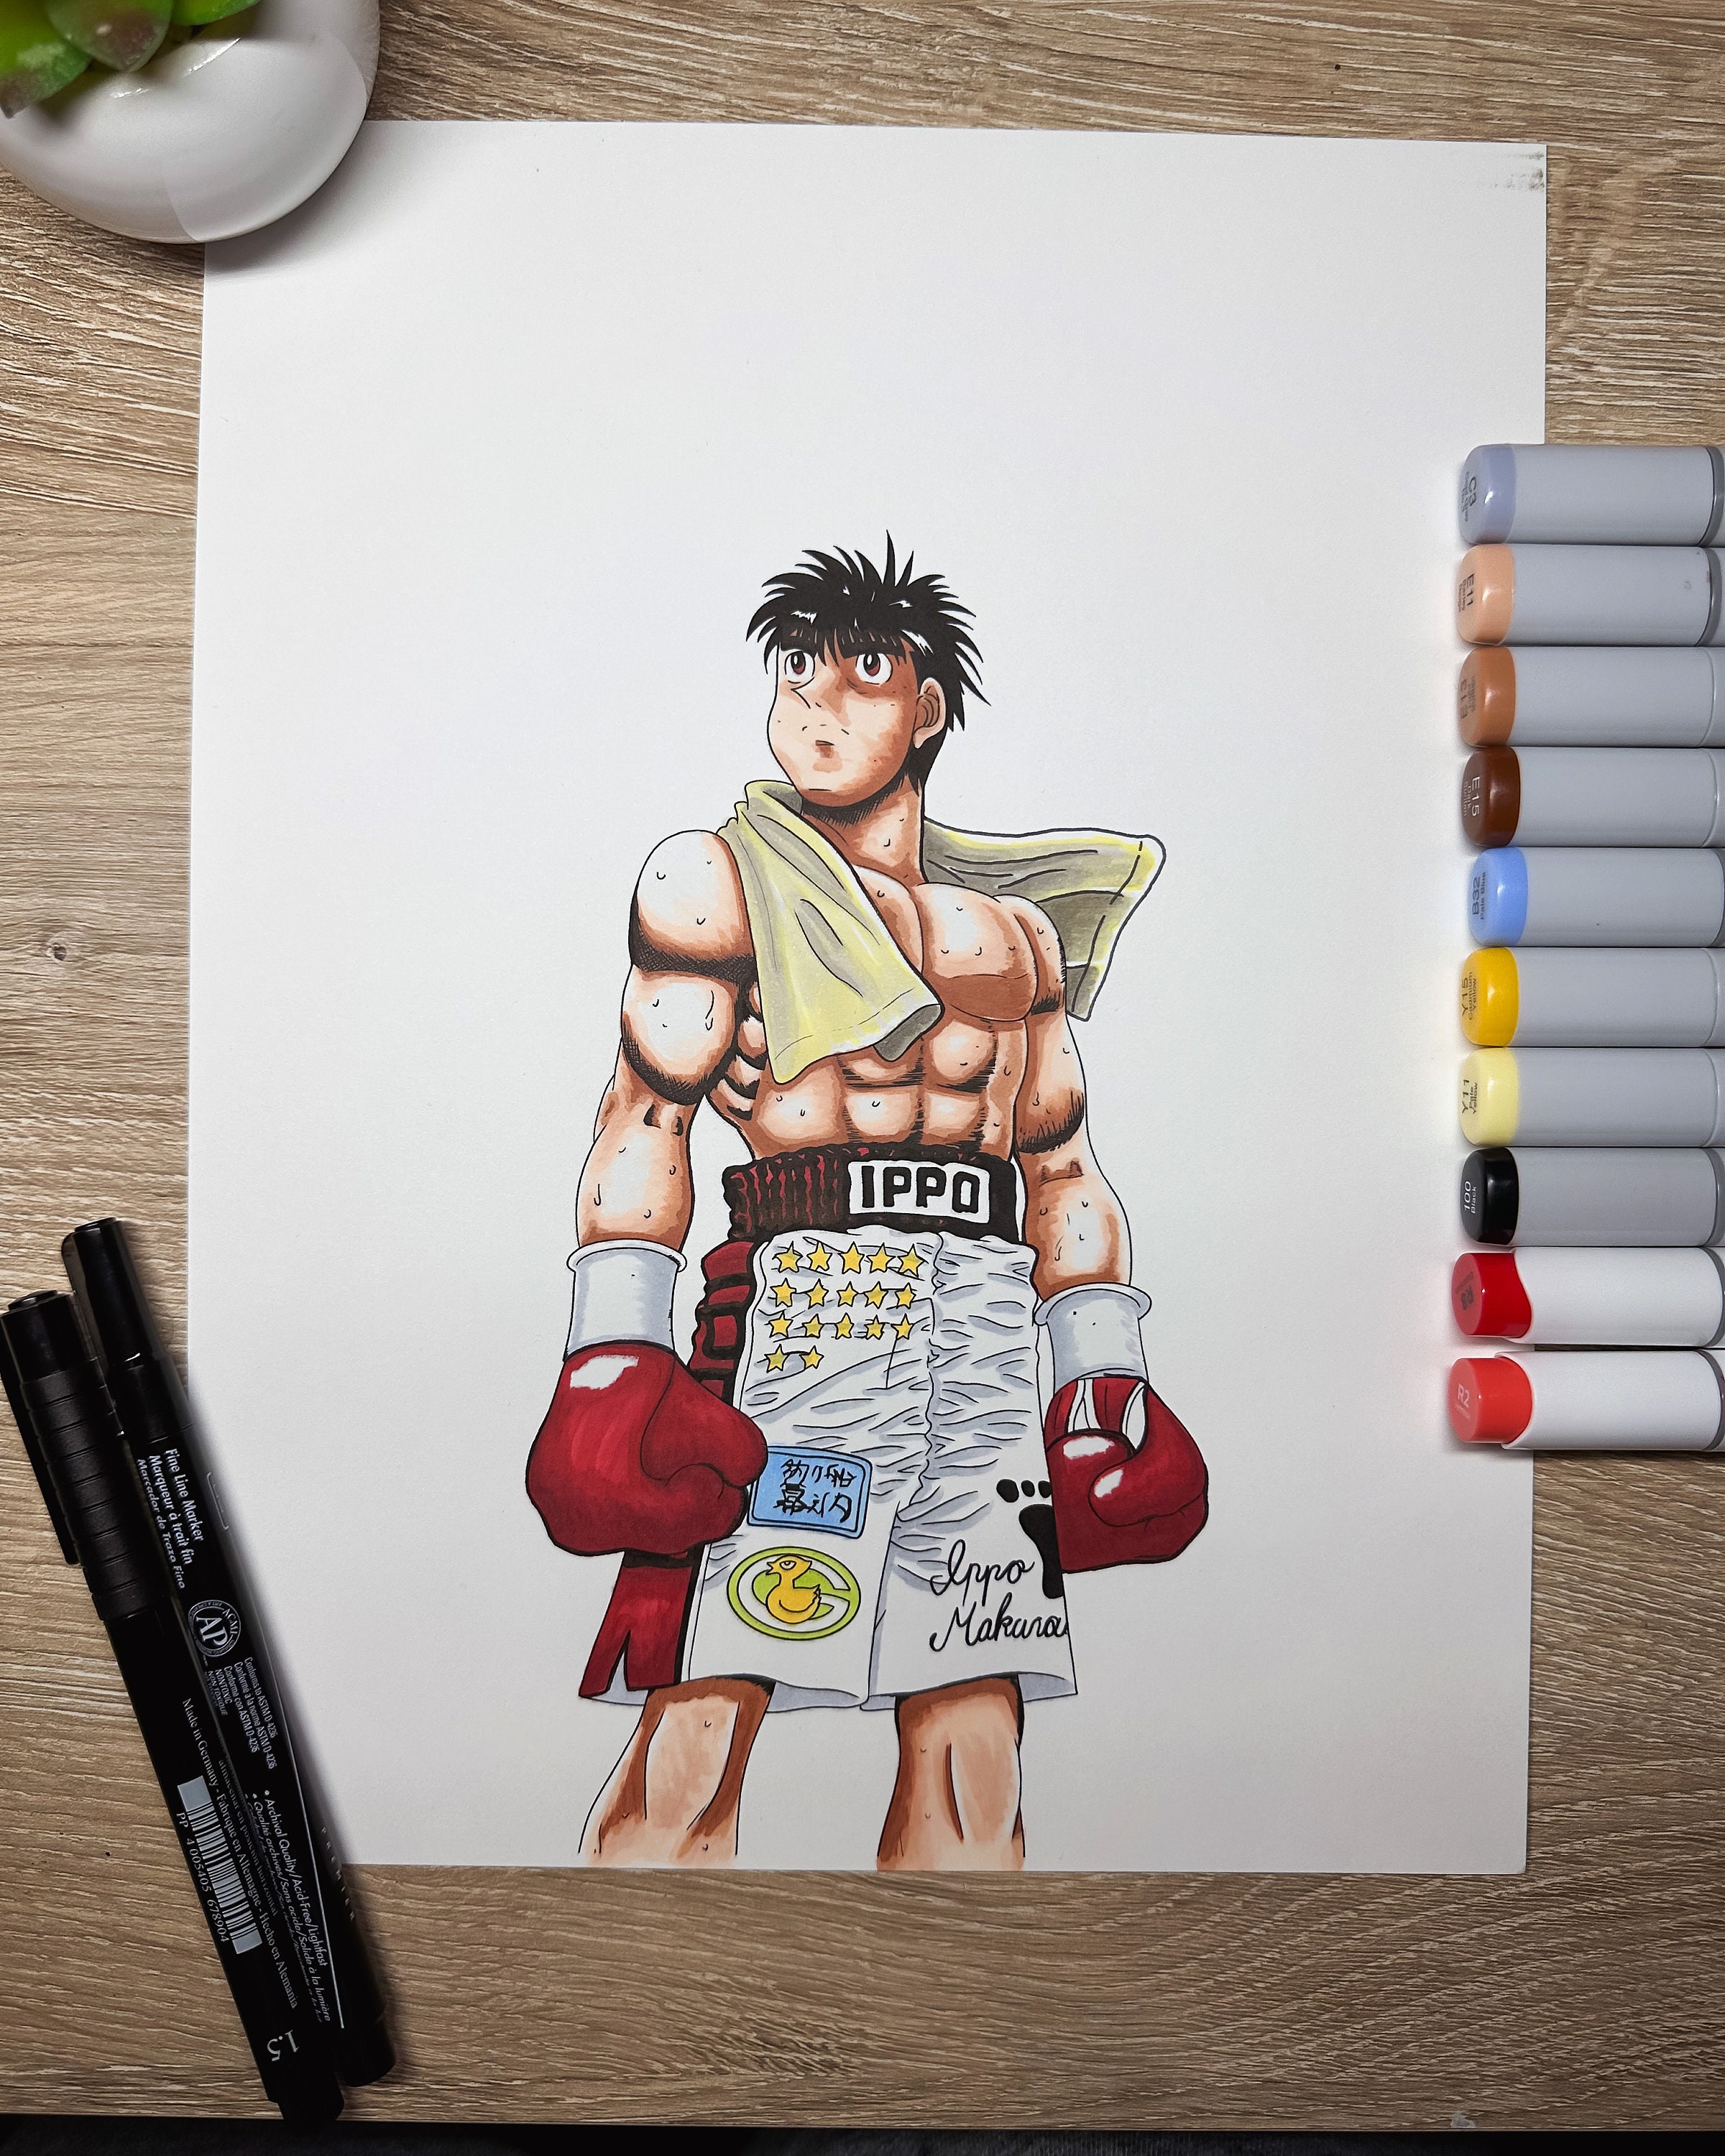 Anime Posters Hajime No Ippo Fighting Boxing Man Cool Room Art Deco Posters  (6) Canvas Wall Art Prints for Wall Decor Room Decor Bedroom Decor Gifts